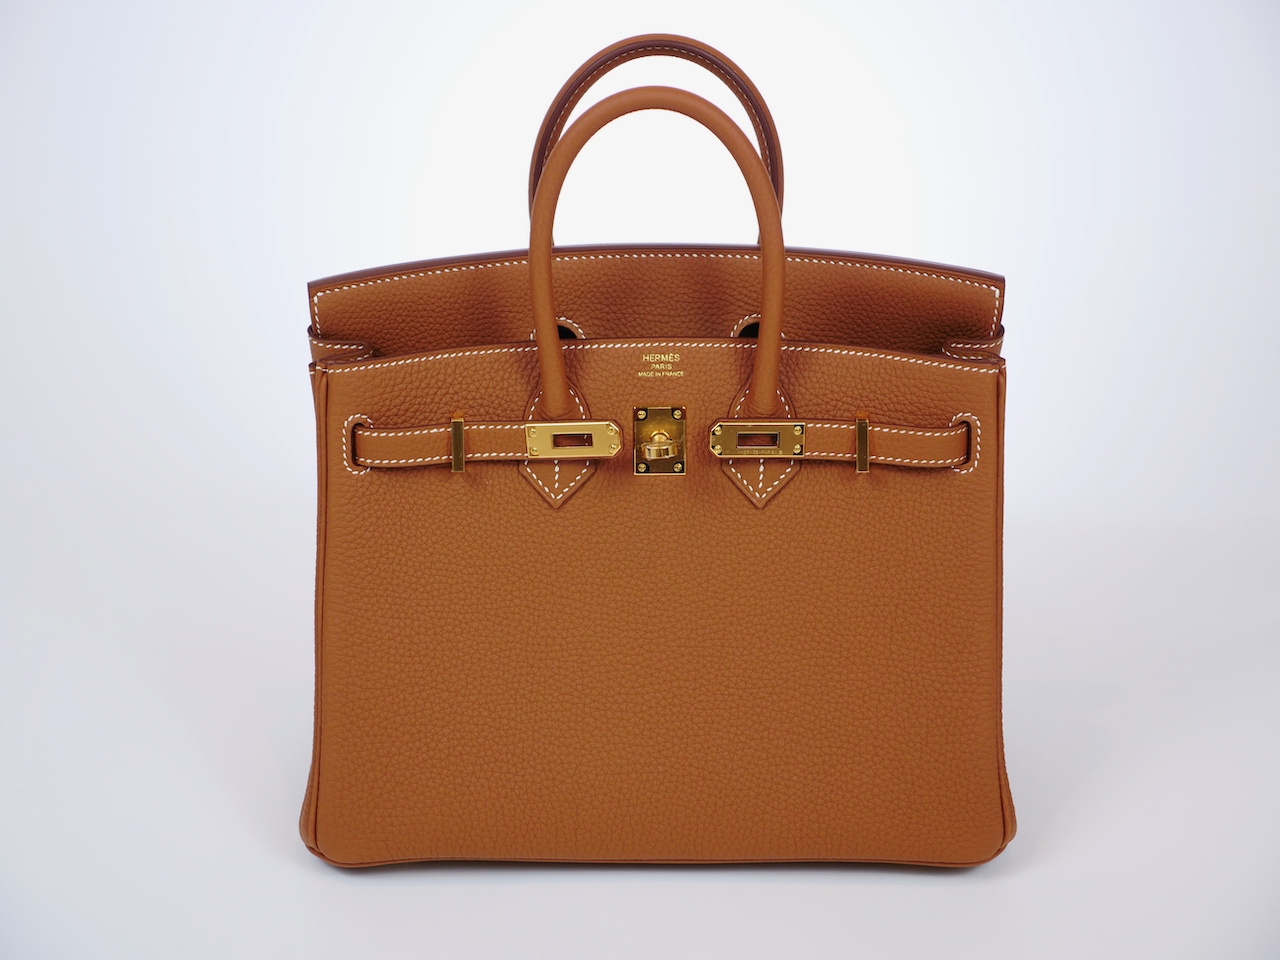 Hermes Leather Preference: Chevre – The Bag Hag Diaries